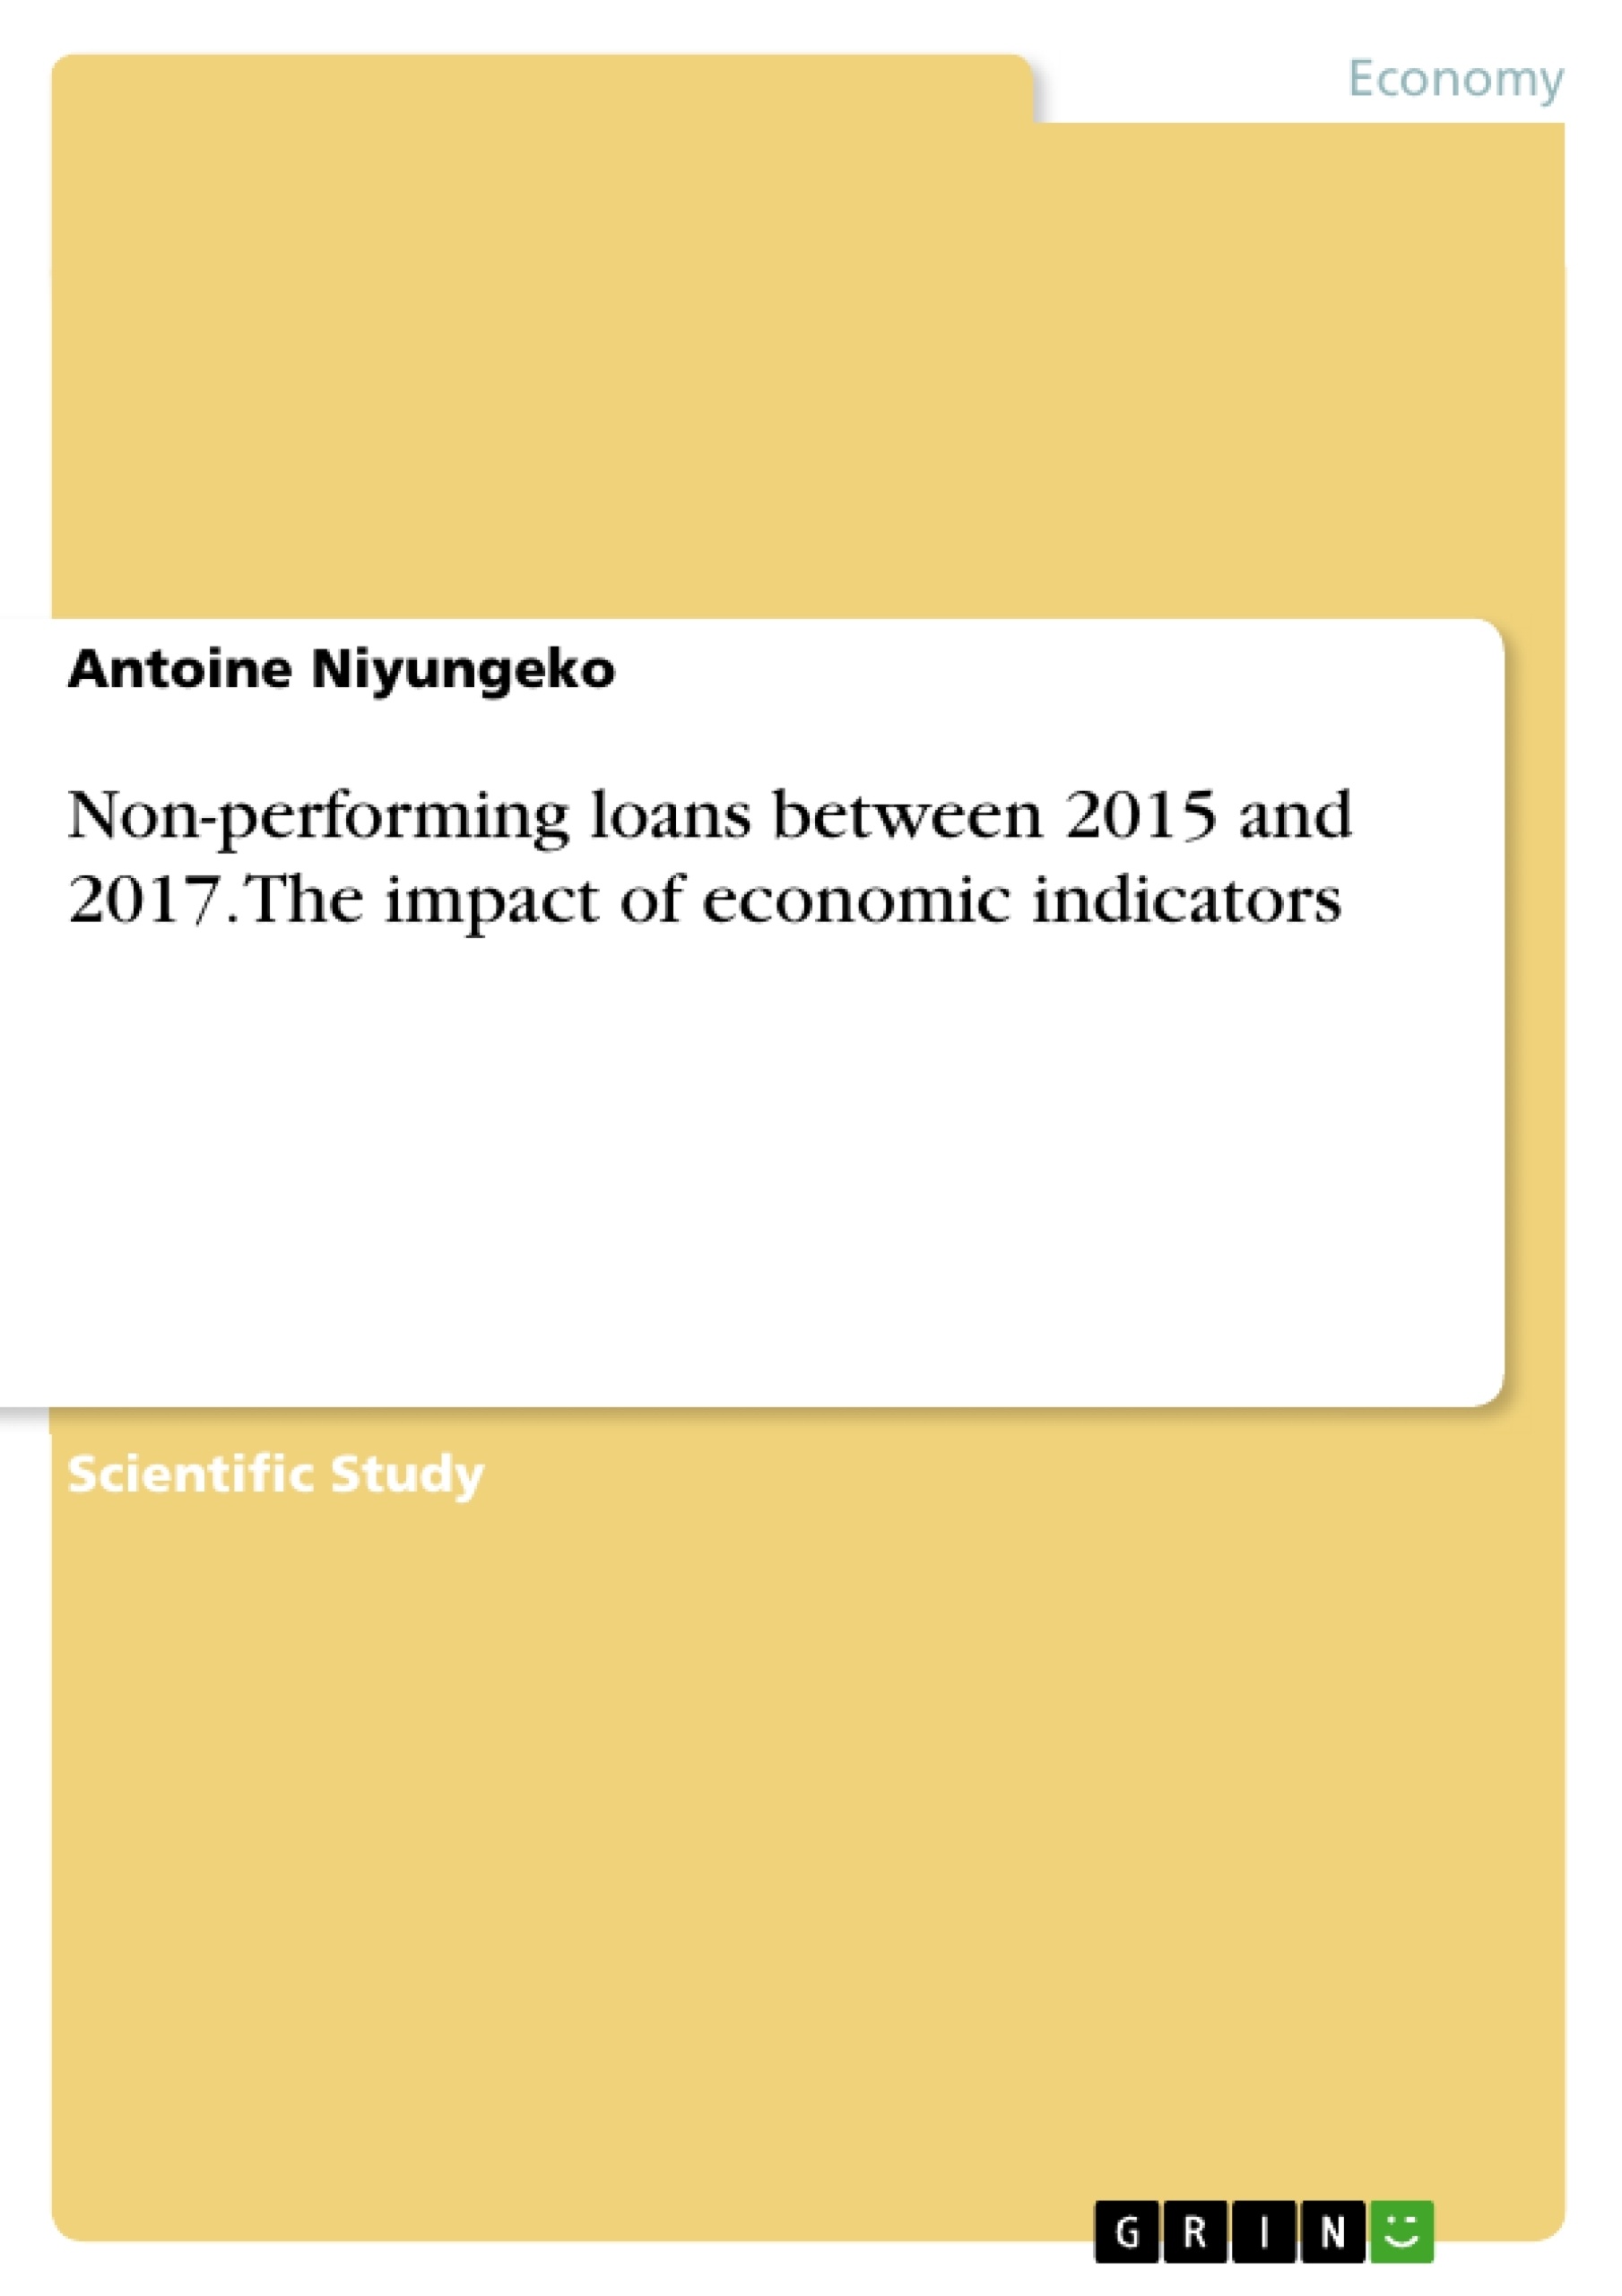 Title: Non-performing loans between 2015 and 2017. The impact of economic indicators